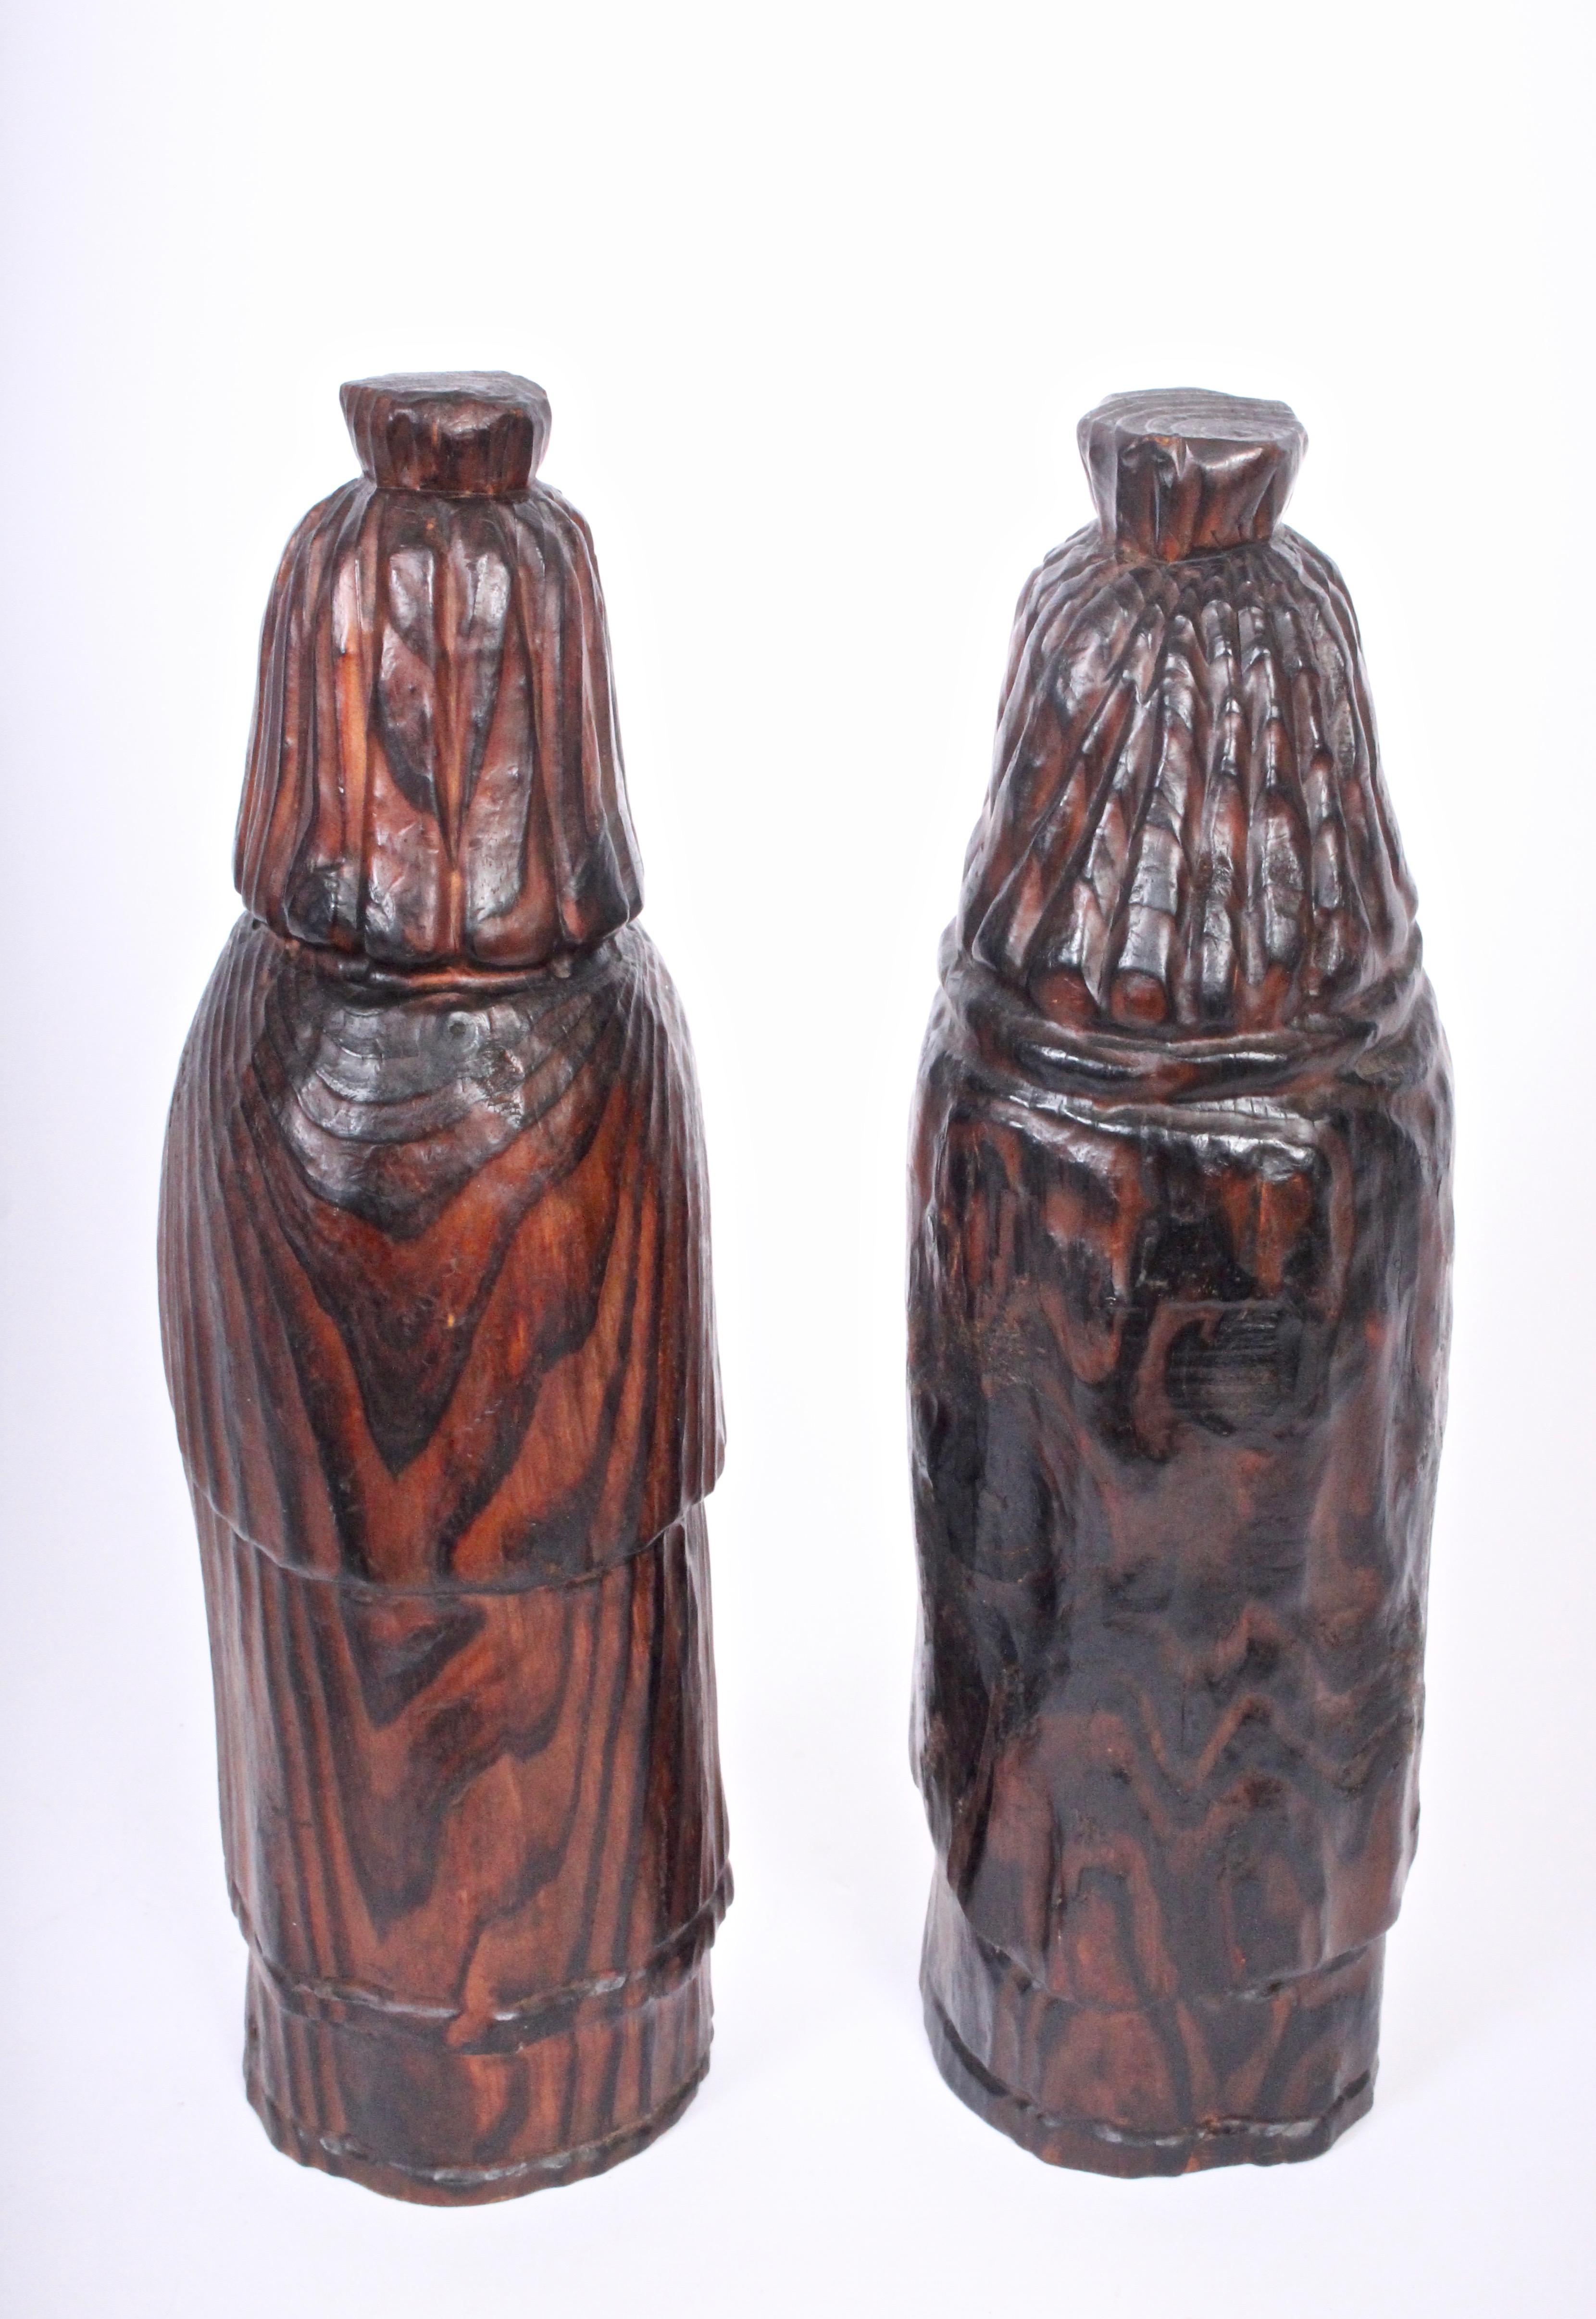 Pair of King & Queen hand carved wooden bottle cozies by William Westenhaver/ WITCO. Sculptural handcrafted stained finely grained wooden figurines created in his Mt. Vernon, Washington studio. Covers 12